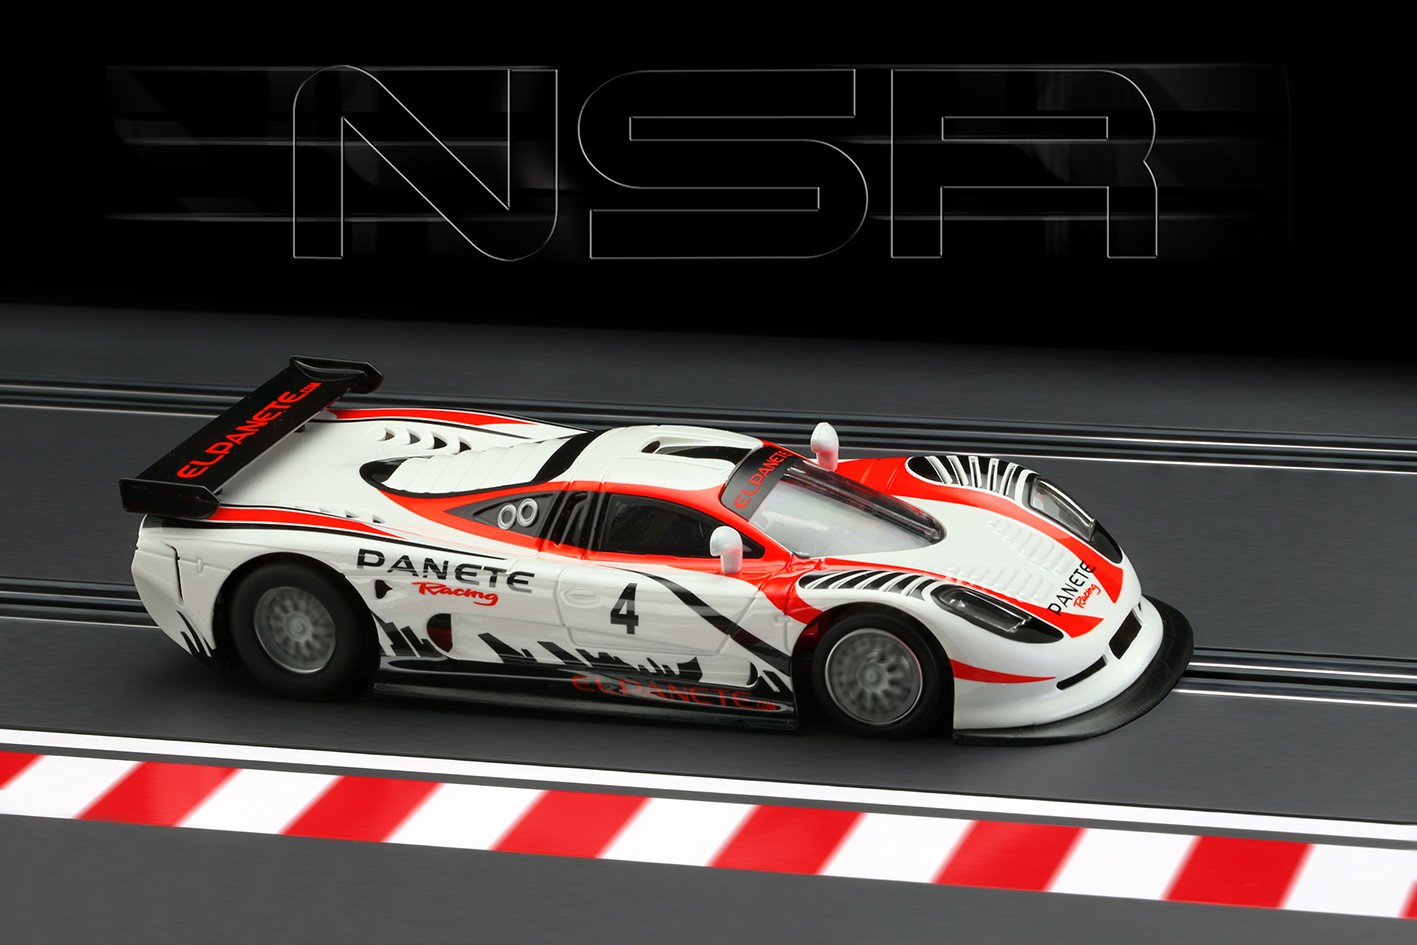 NSR - Mosler MT900R Panete Racing - Red #4, 0139SW-EVO5